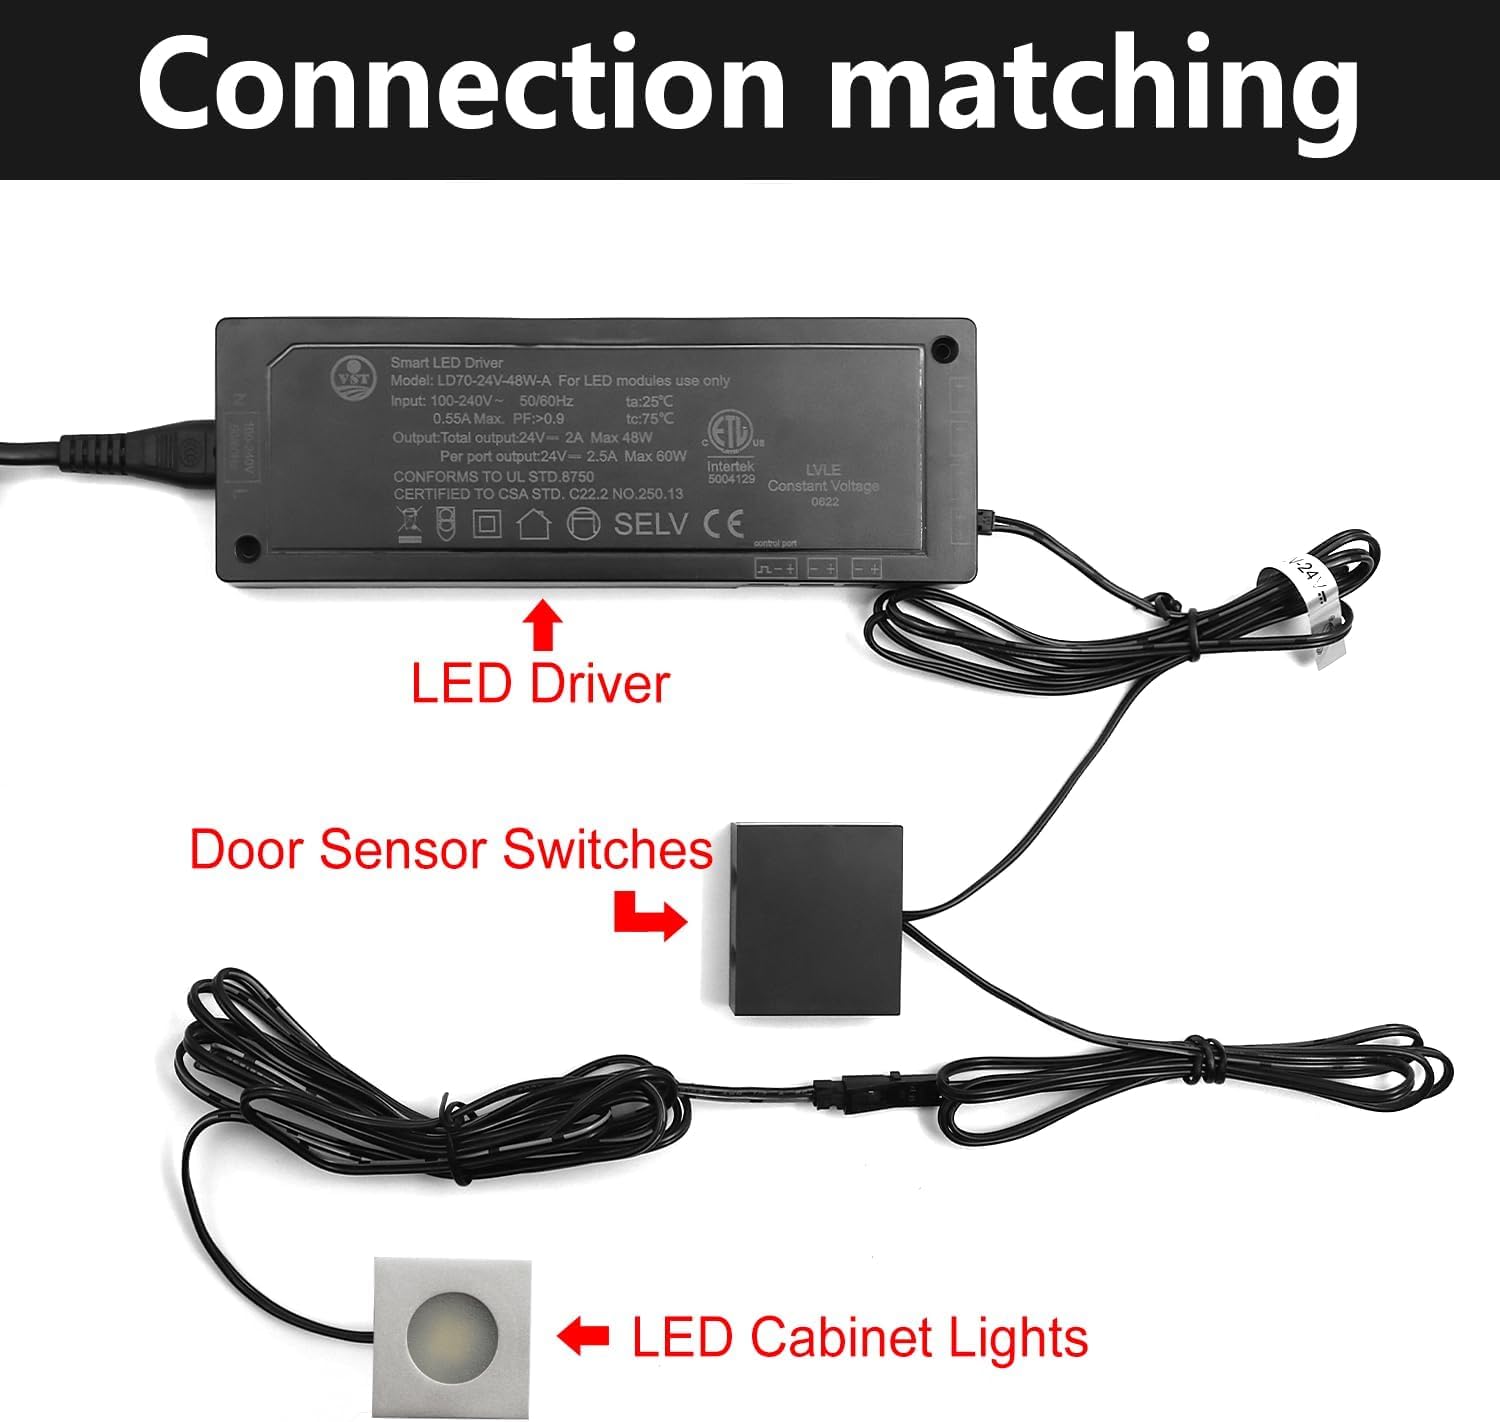 Send inquiry for 12V LED IR Door Sensor Switch 30W Smart Home Light Switch with 2-60mm Sensing Distance for Closet, Cabinet to high quality LED IR Door Sensor Switch supplier. Wholesale Smart Home Light Switch directly from China LED IR Door Sensor Switch manufacturers/exporters. Get a factory sale price list and become a distributor/agent-vstled.com.